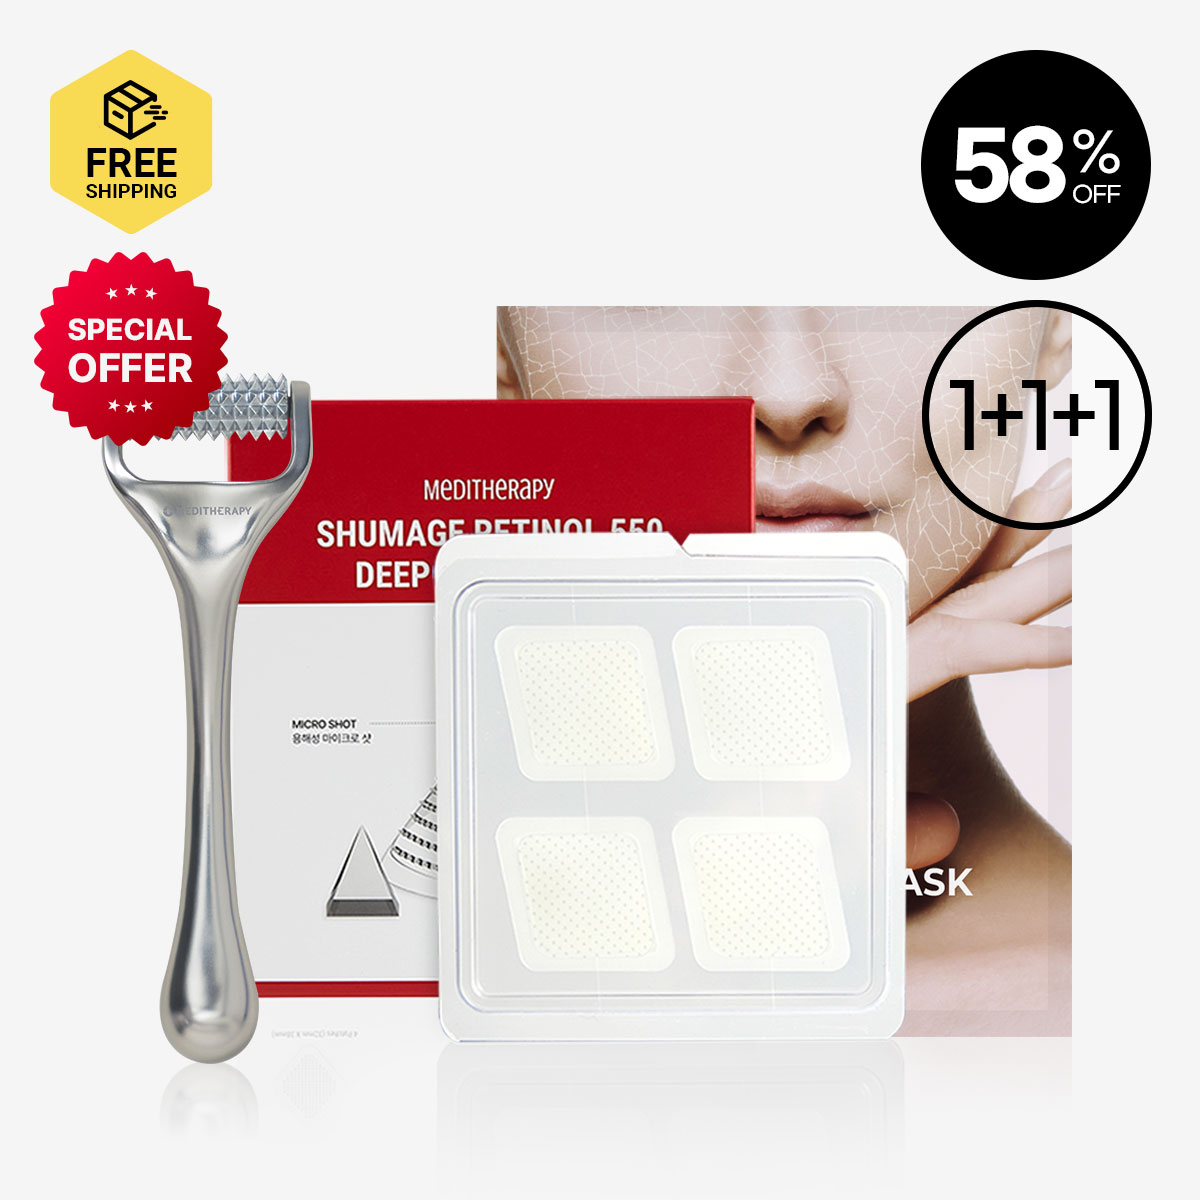 [MEDITHERAPY] Shumage Retinol 550 Deep Shot Patch 1  + Wrinkle-Fit Mask 1 + Wrinkle-Fit Needle Roller 1